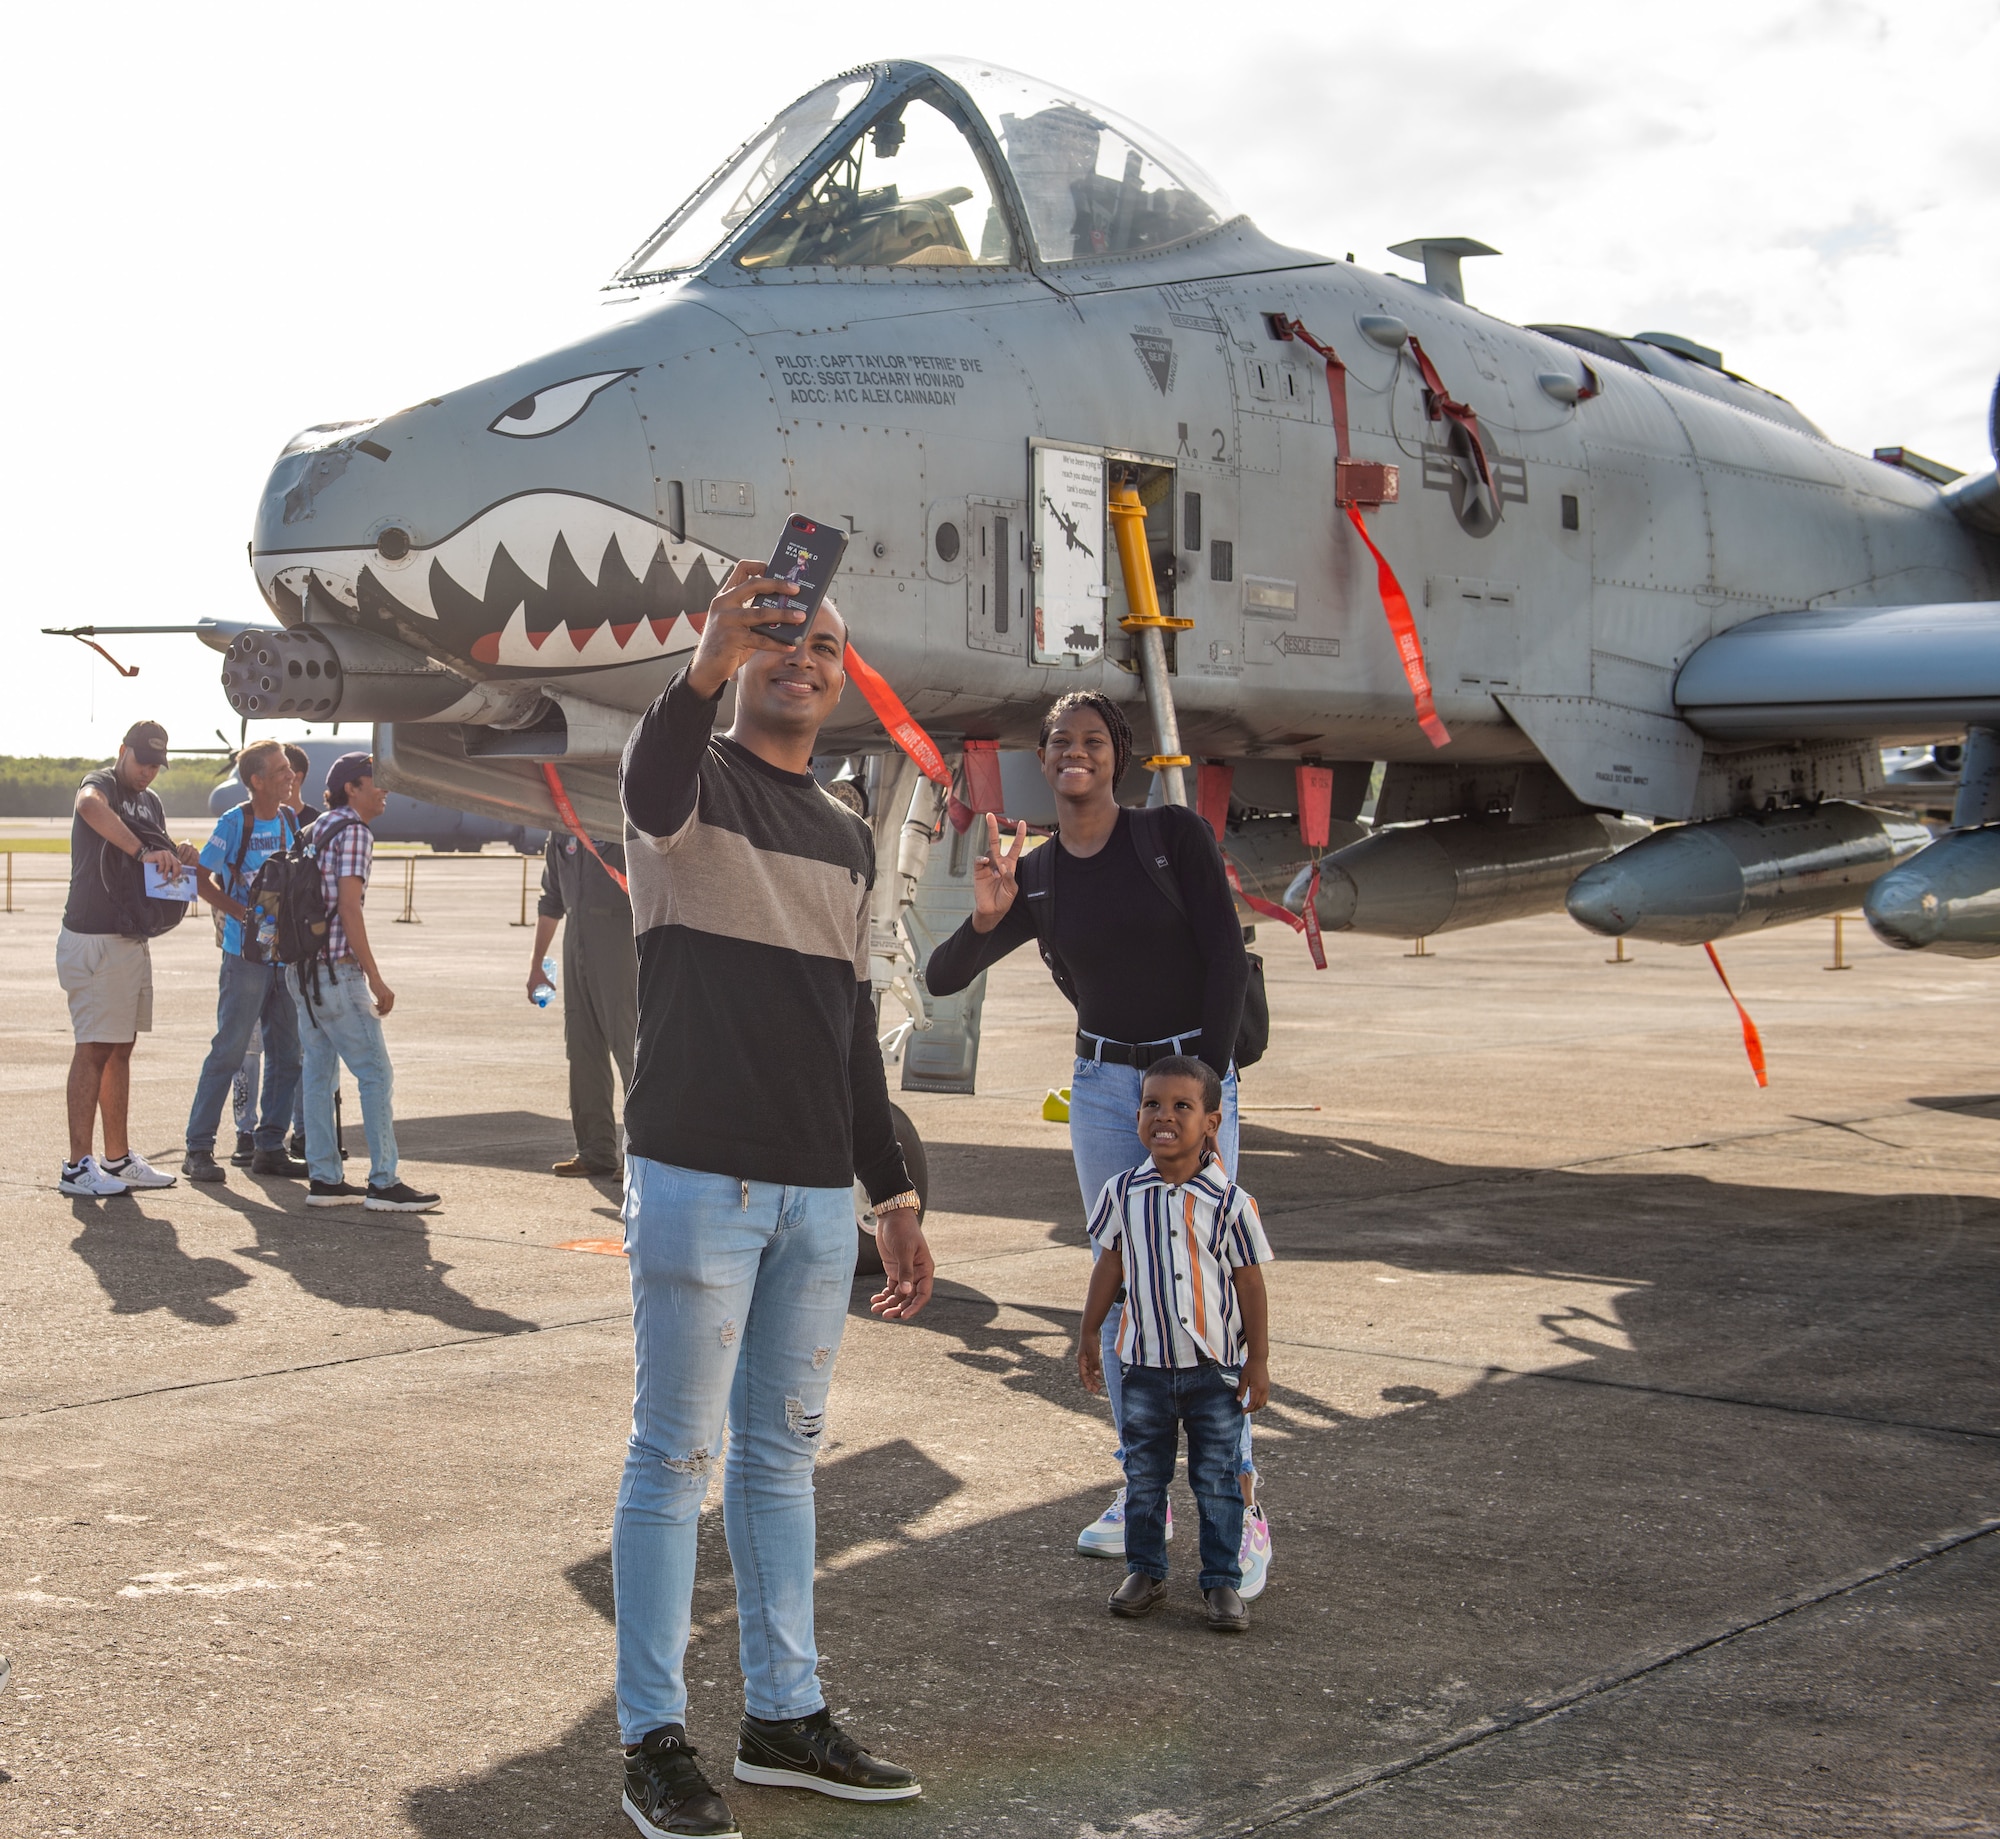 A family takes a photo in front of an A-10C Thunderbolt II during an airshow at San Isidro Air Base, Dominican Republic, Feb. 19, 2023.The airshow was dedicated to the Dominican Republic’s 75th anniversary where both U.S. and Dominican Republic aircraft demonstrated capabilities and strengthened their bond as partner nations.(U.S. Air Force photo by Tech. Sgt. Jessica H. Smith-McMahan)